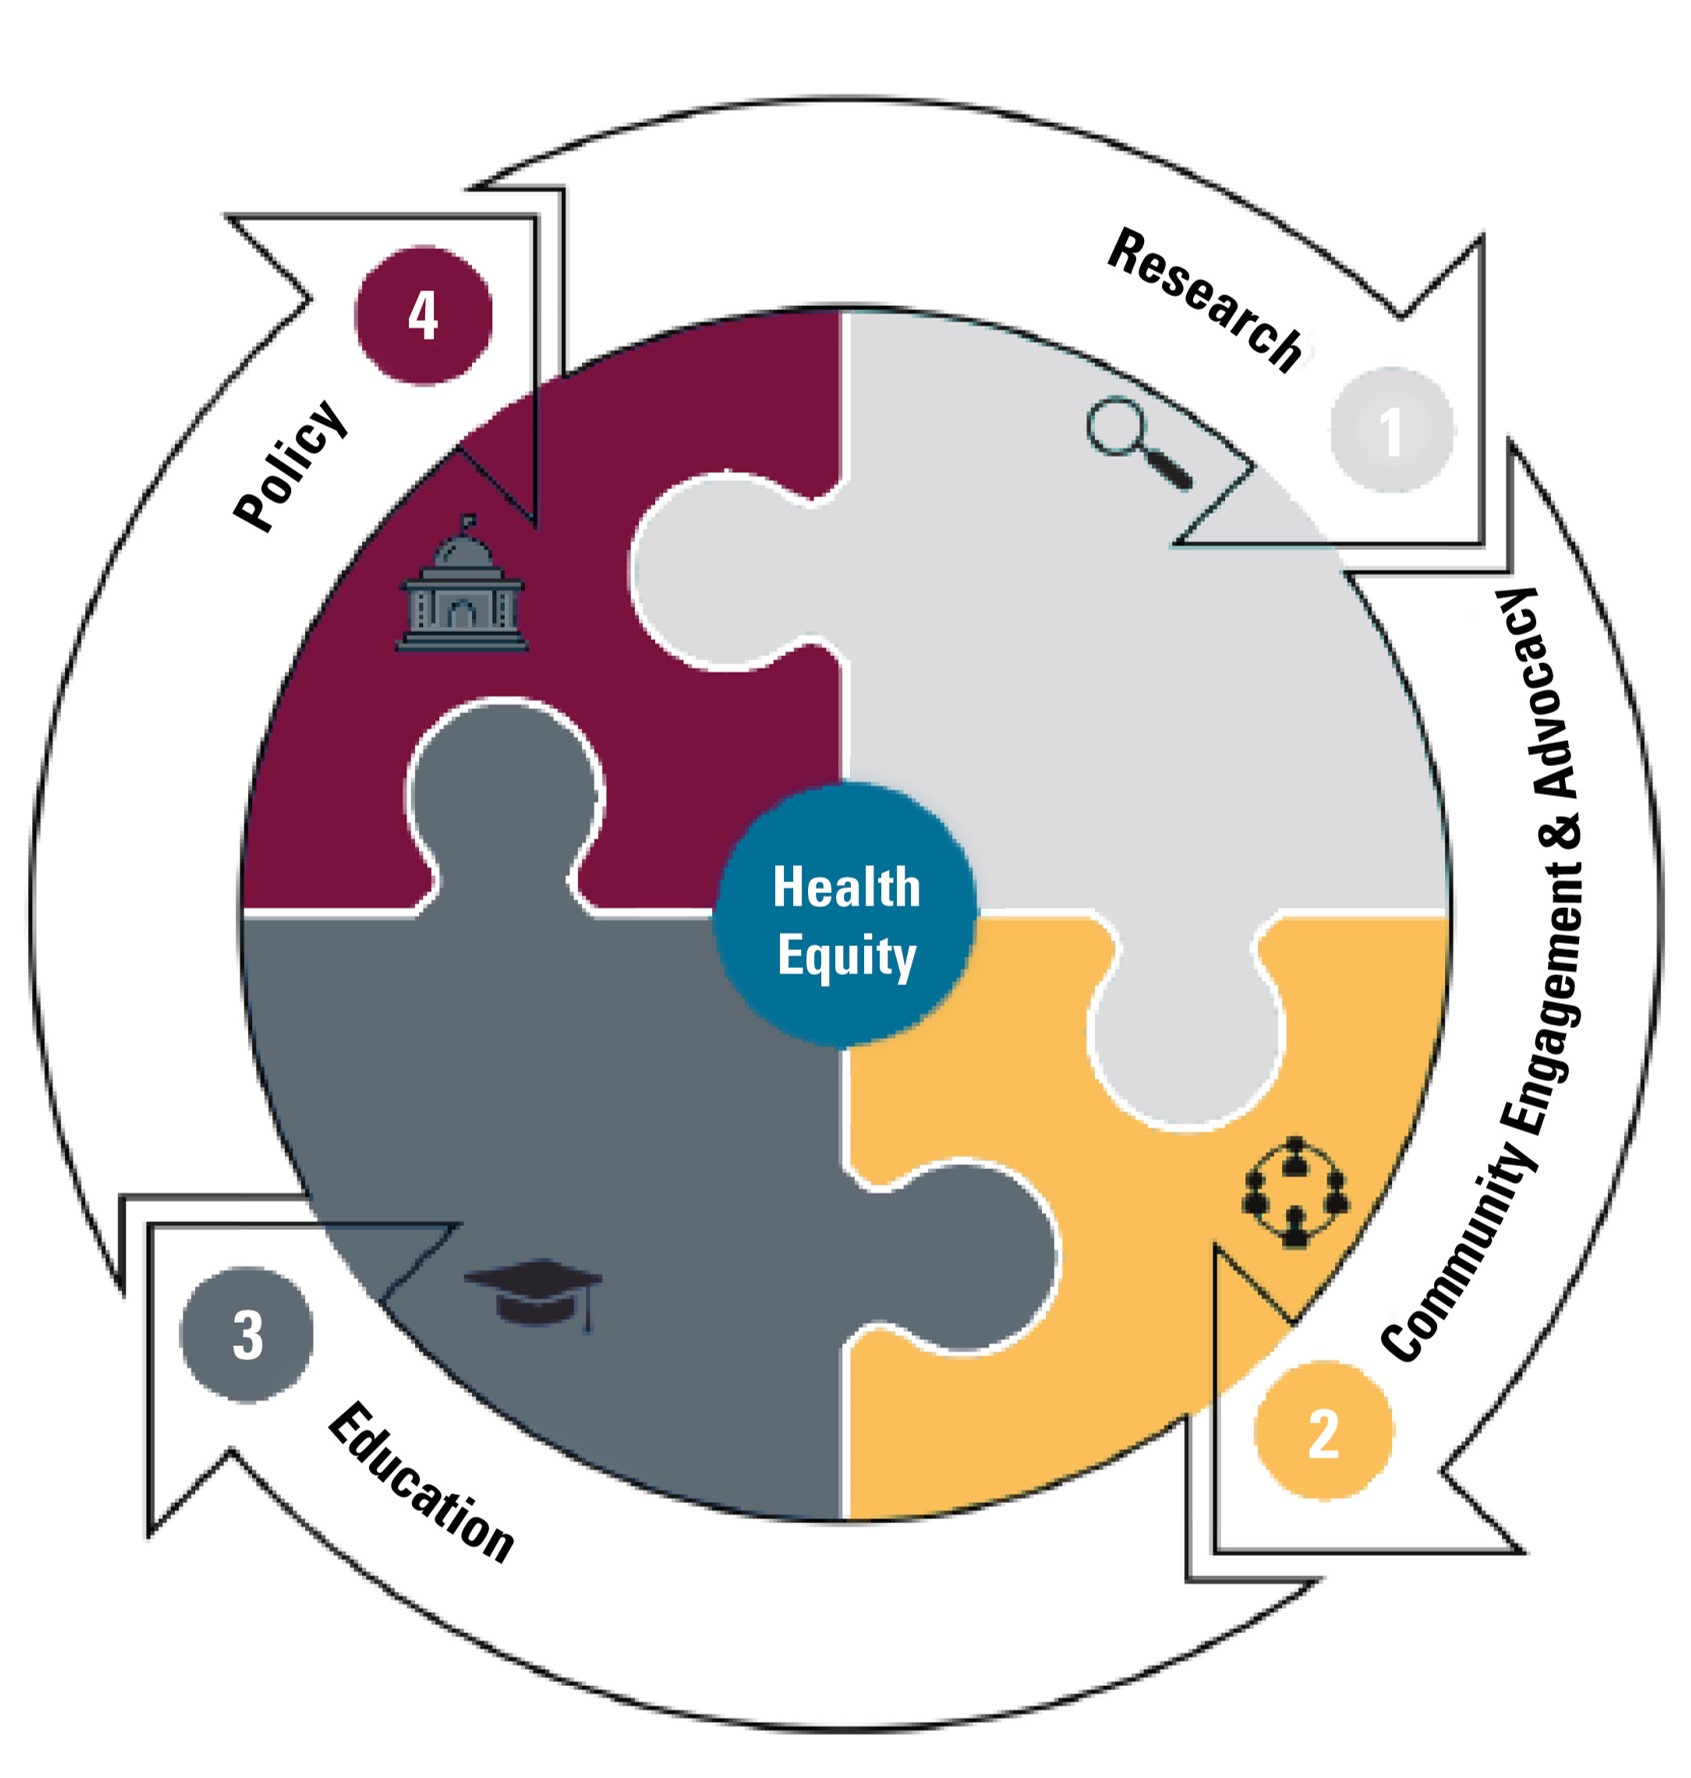 Diagram showing the cycle of research, community engagement and advocacy, education, and policy that together affect health equity.